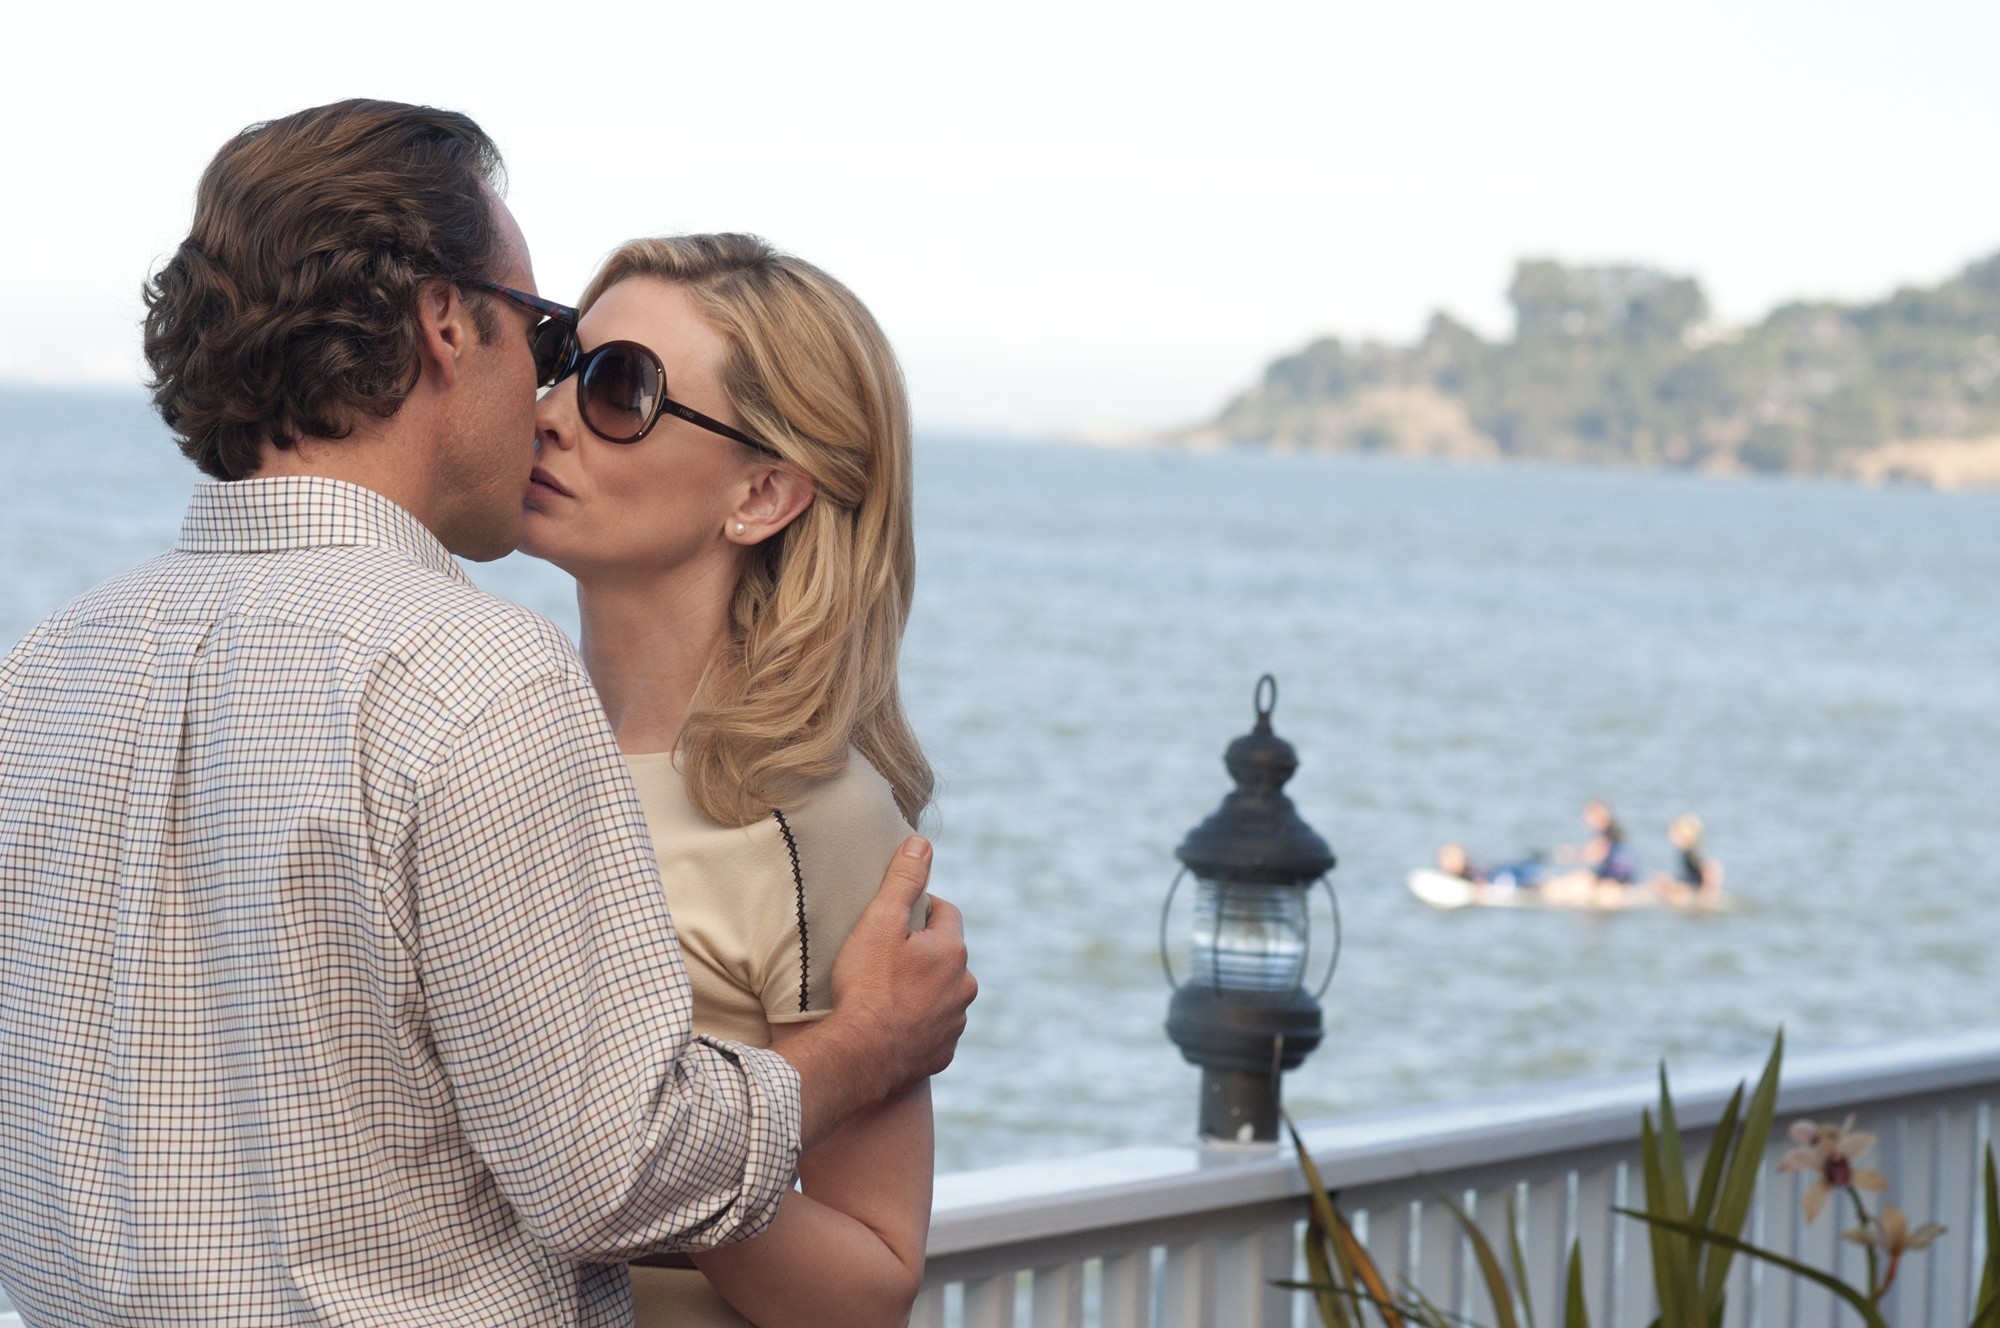 Peter Sarsgaard stars as Dwight and Cate Blanchett stars as Jasmine in Sony Pictures Classics' Blue Jasmine (2013)